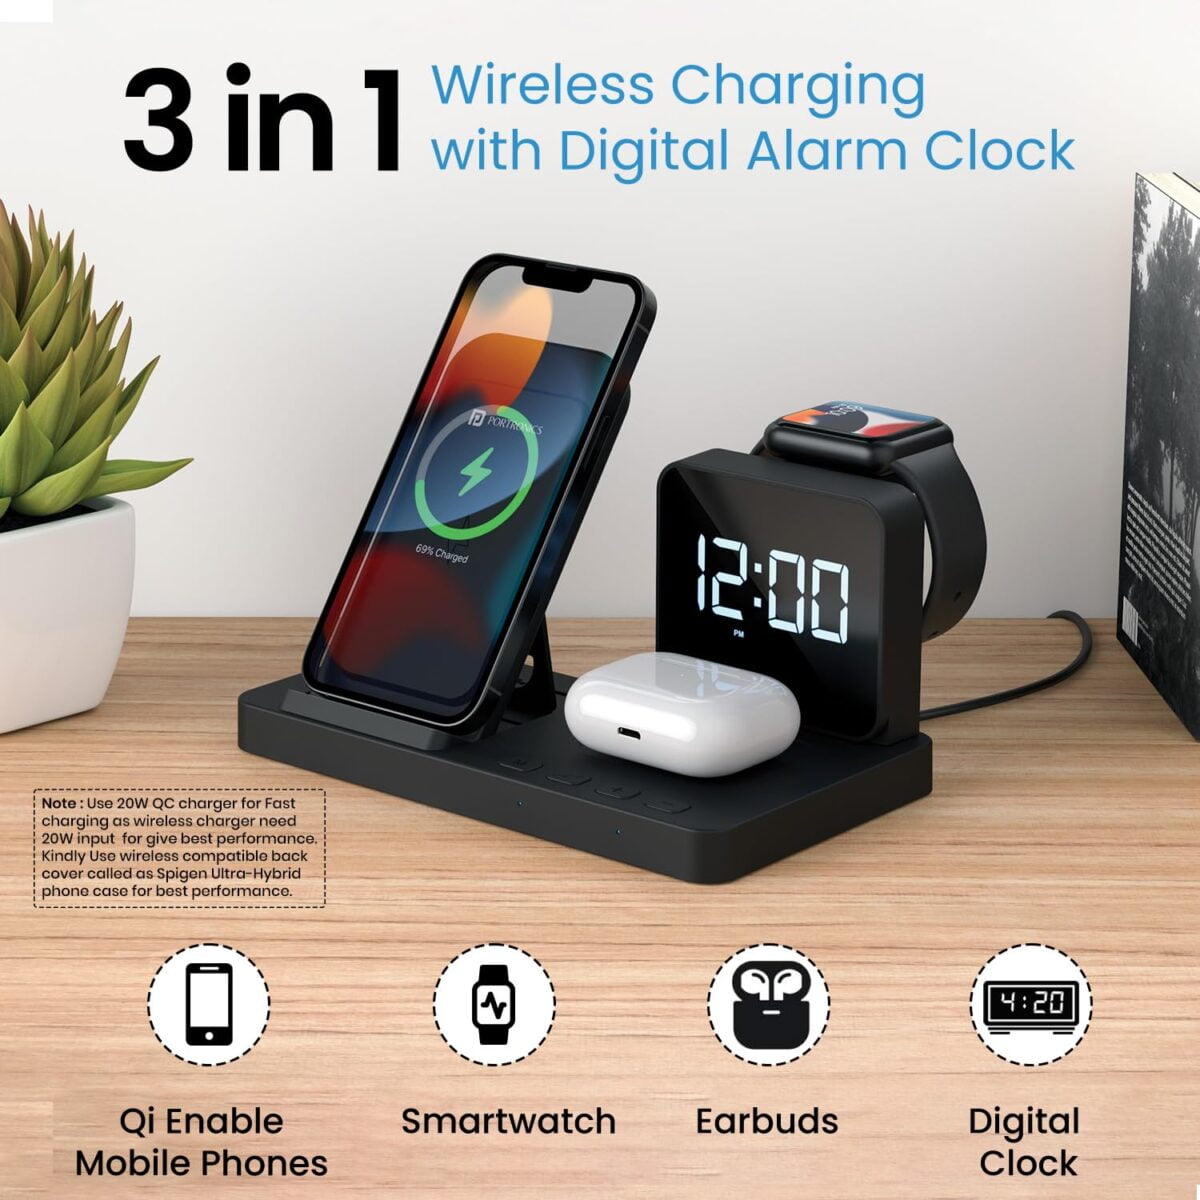 Portronics bella 15 w 3 in 1 wireless charger for iphone 7 portronics bella 15 w 3 in 1 wireless charger for iphone